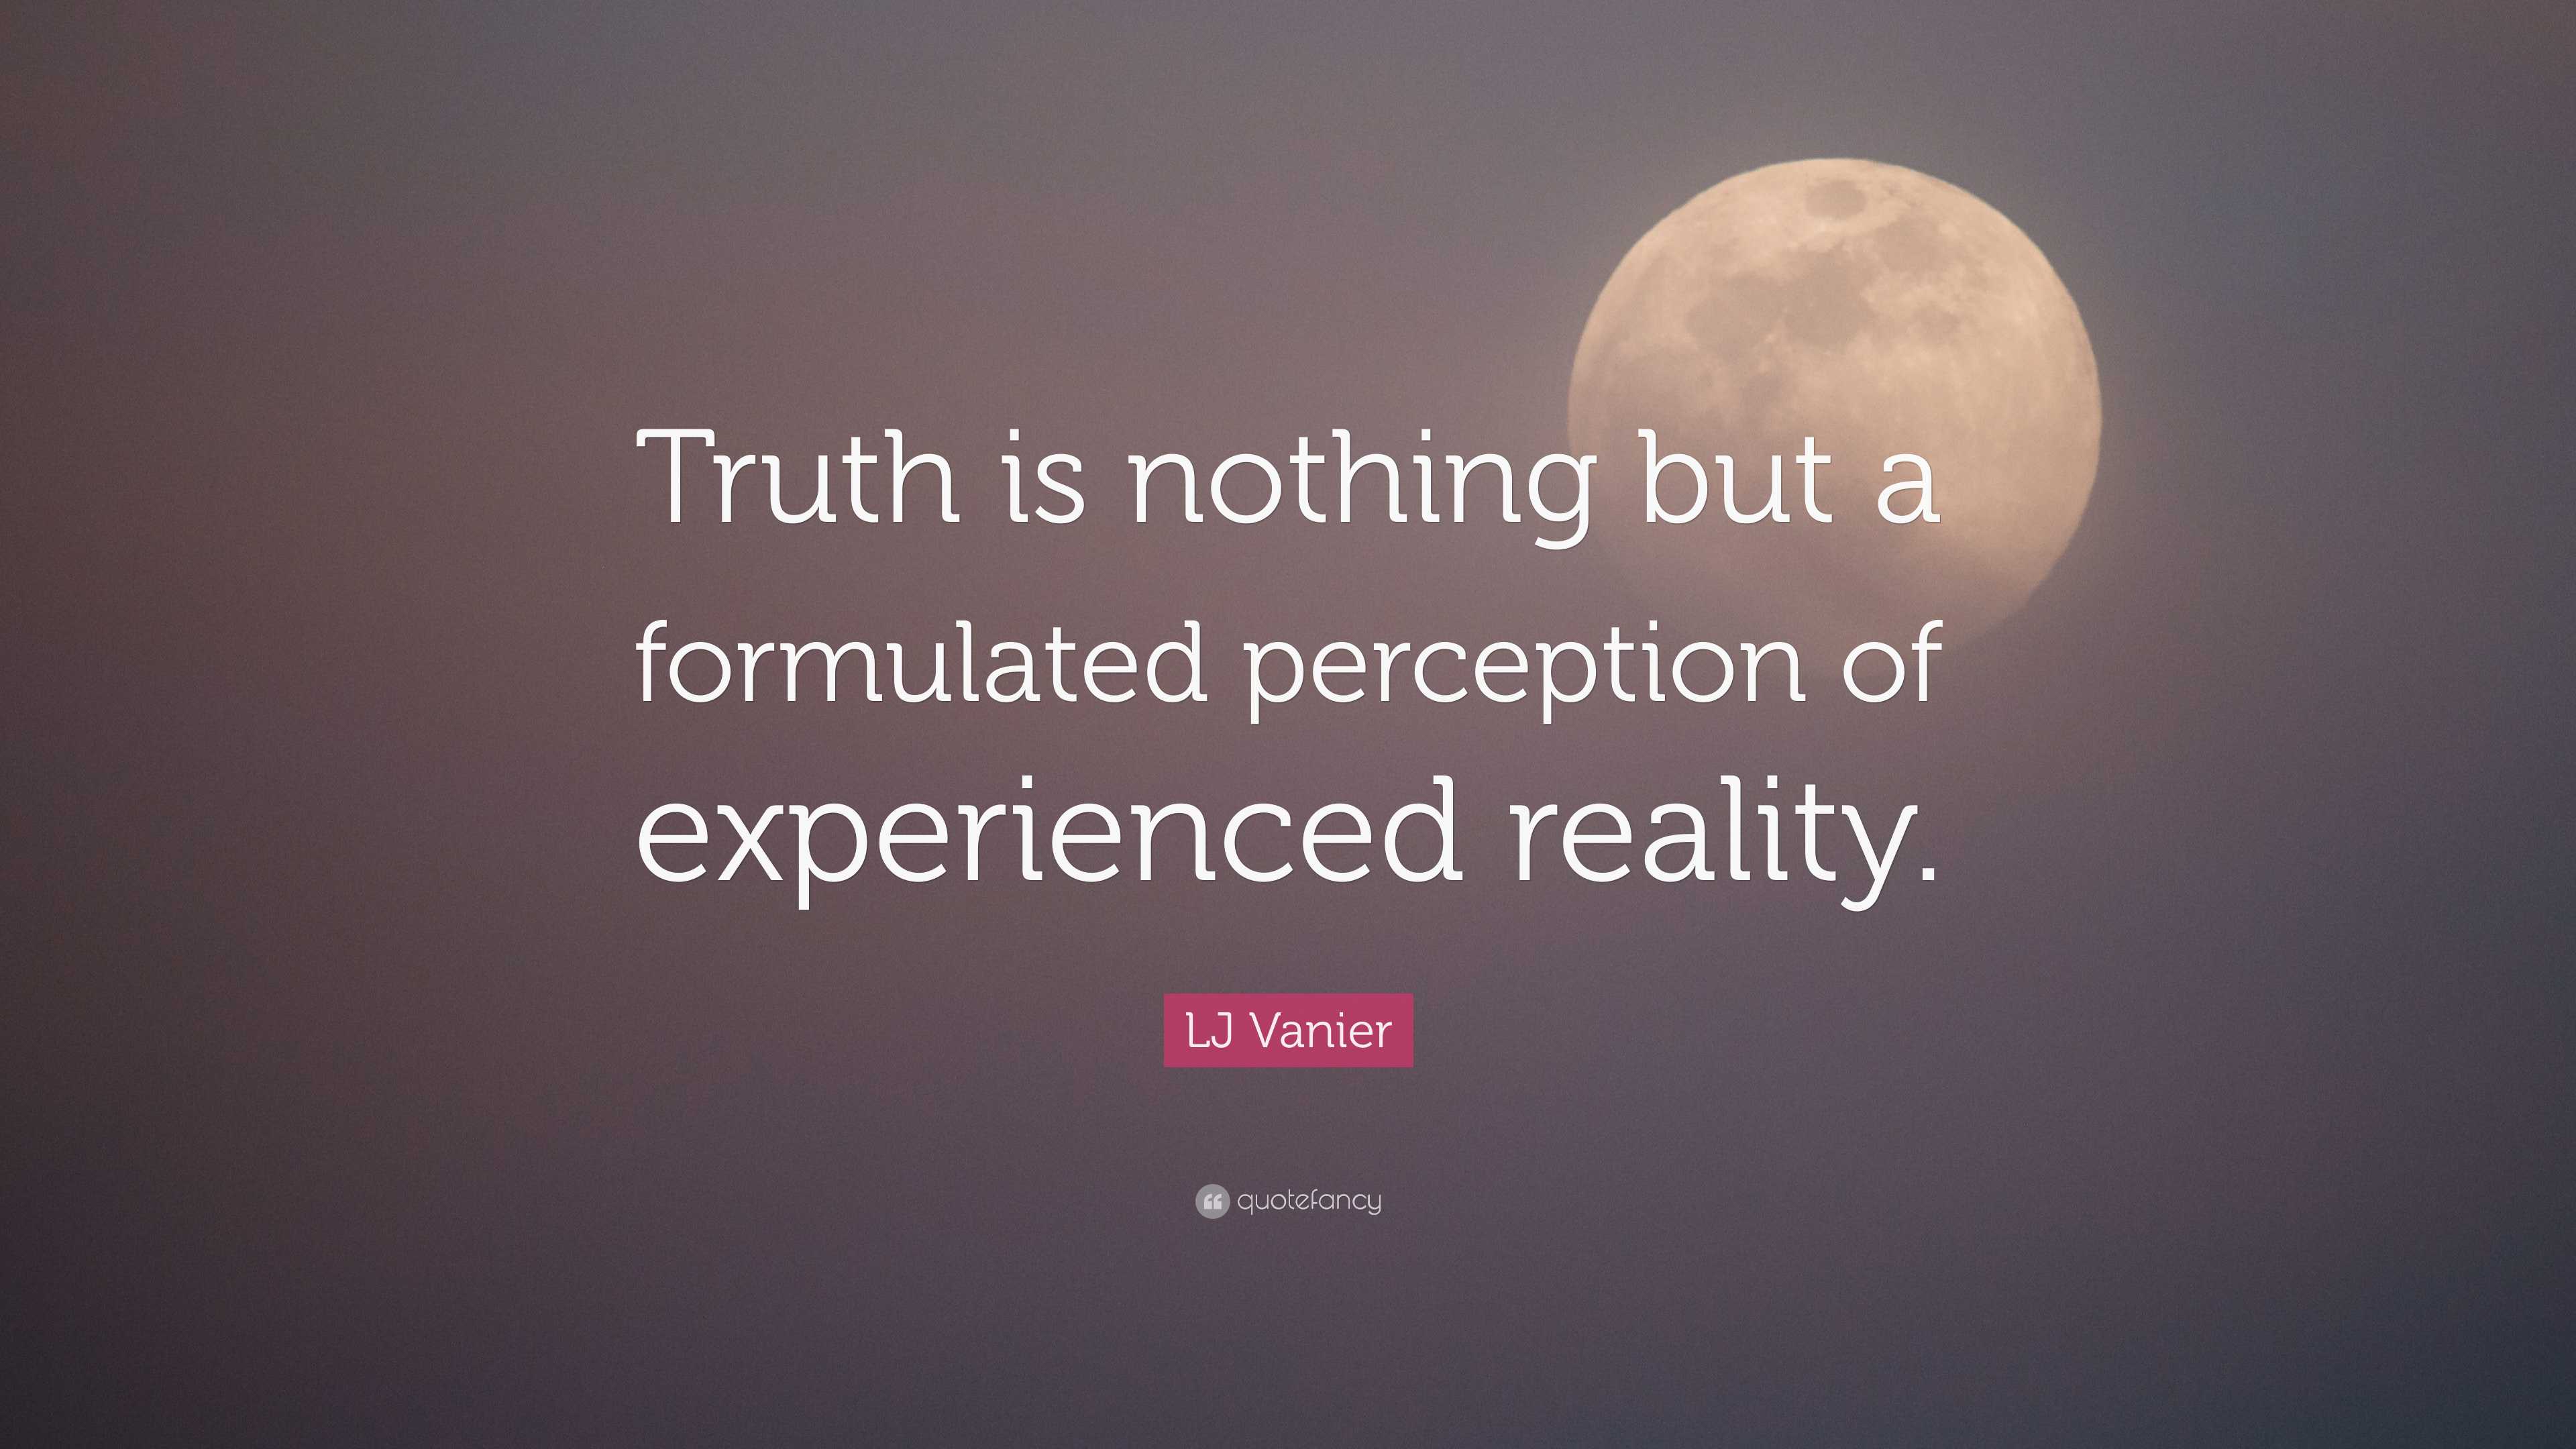 LJ Vanier Quote: “Truth is nothing but a formulated perception of ...